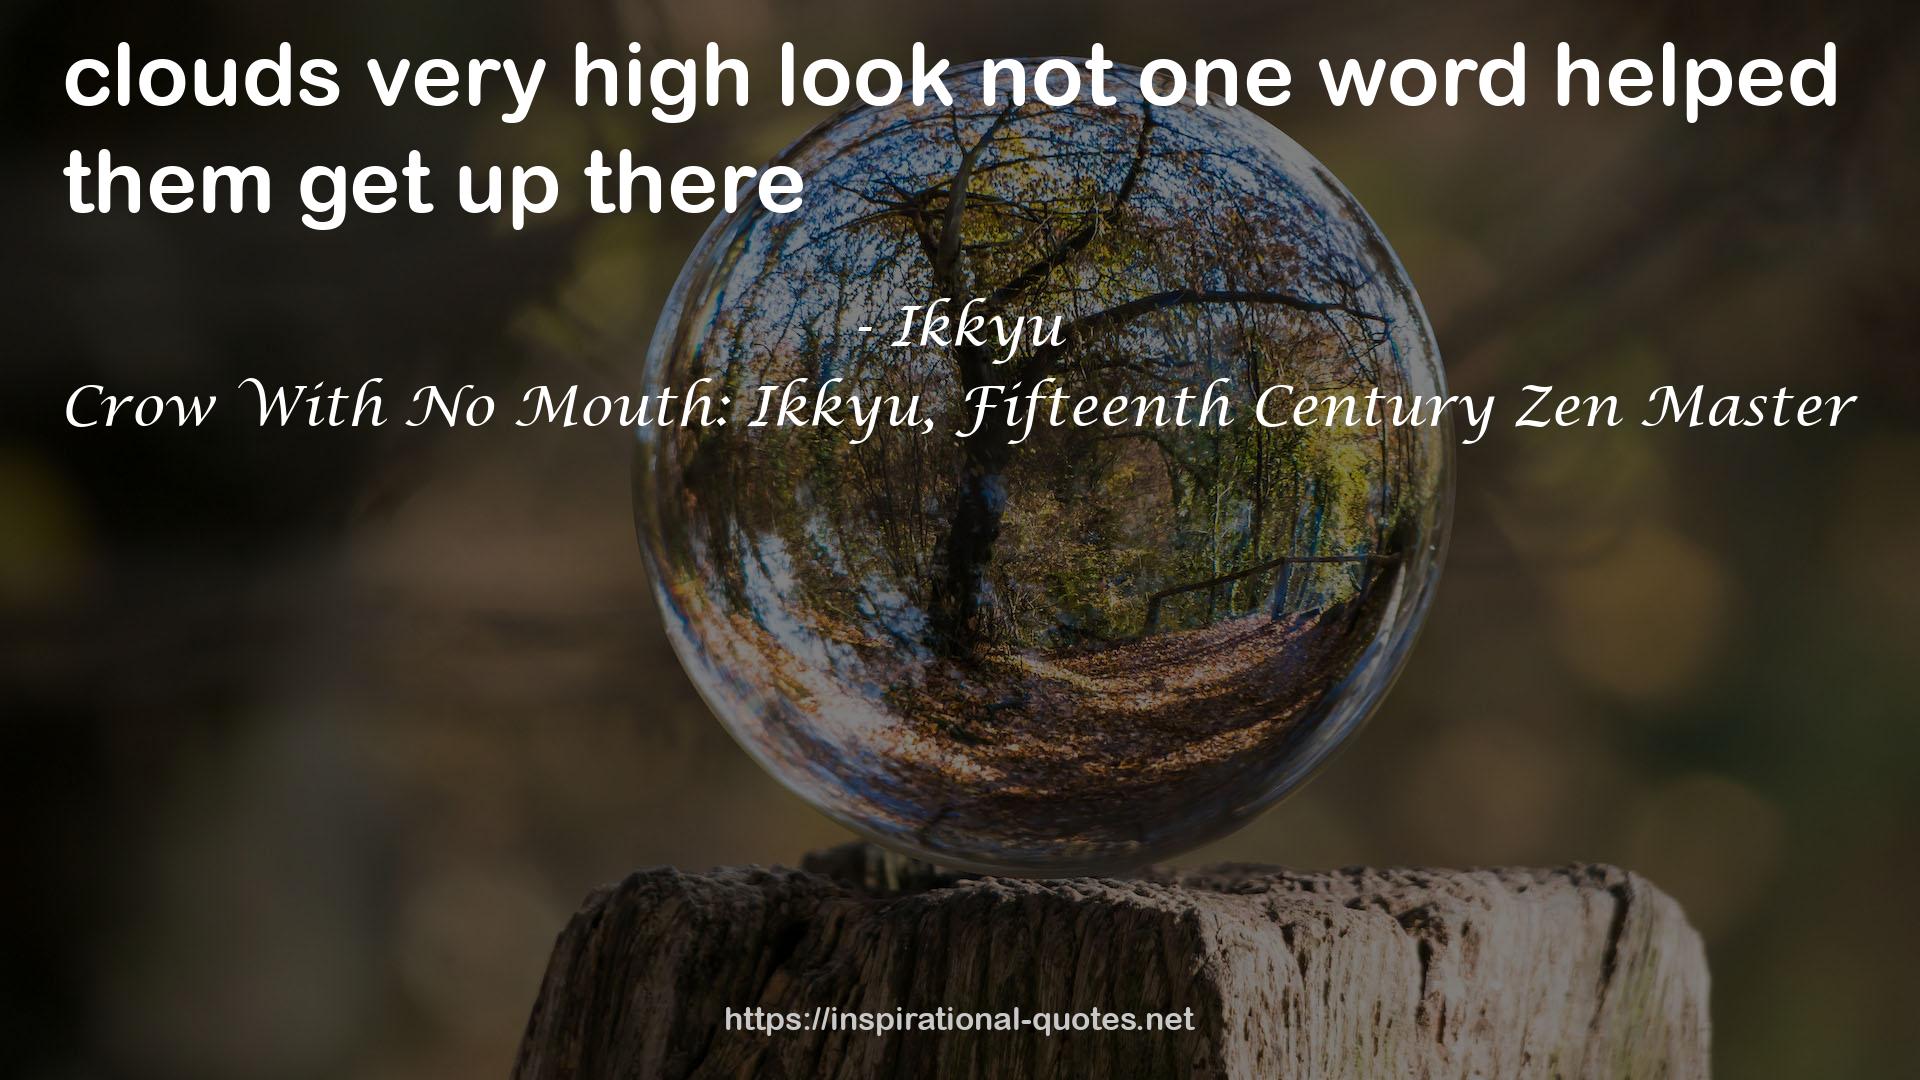 very high looknot  QUOTES